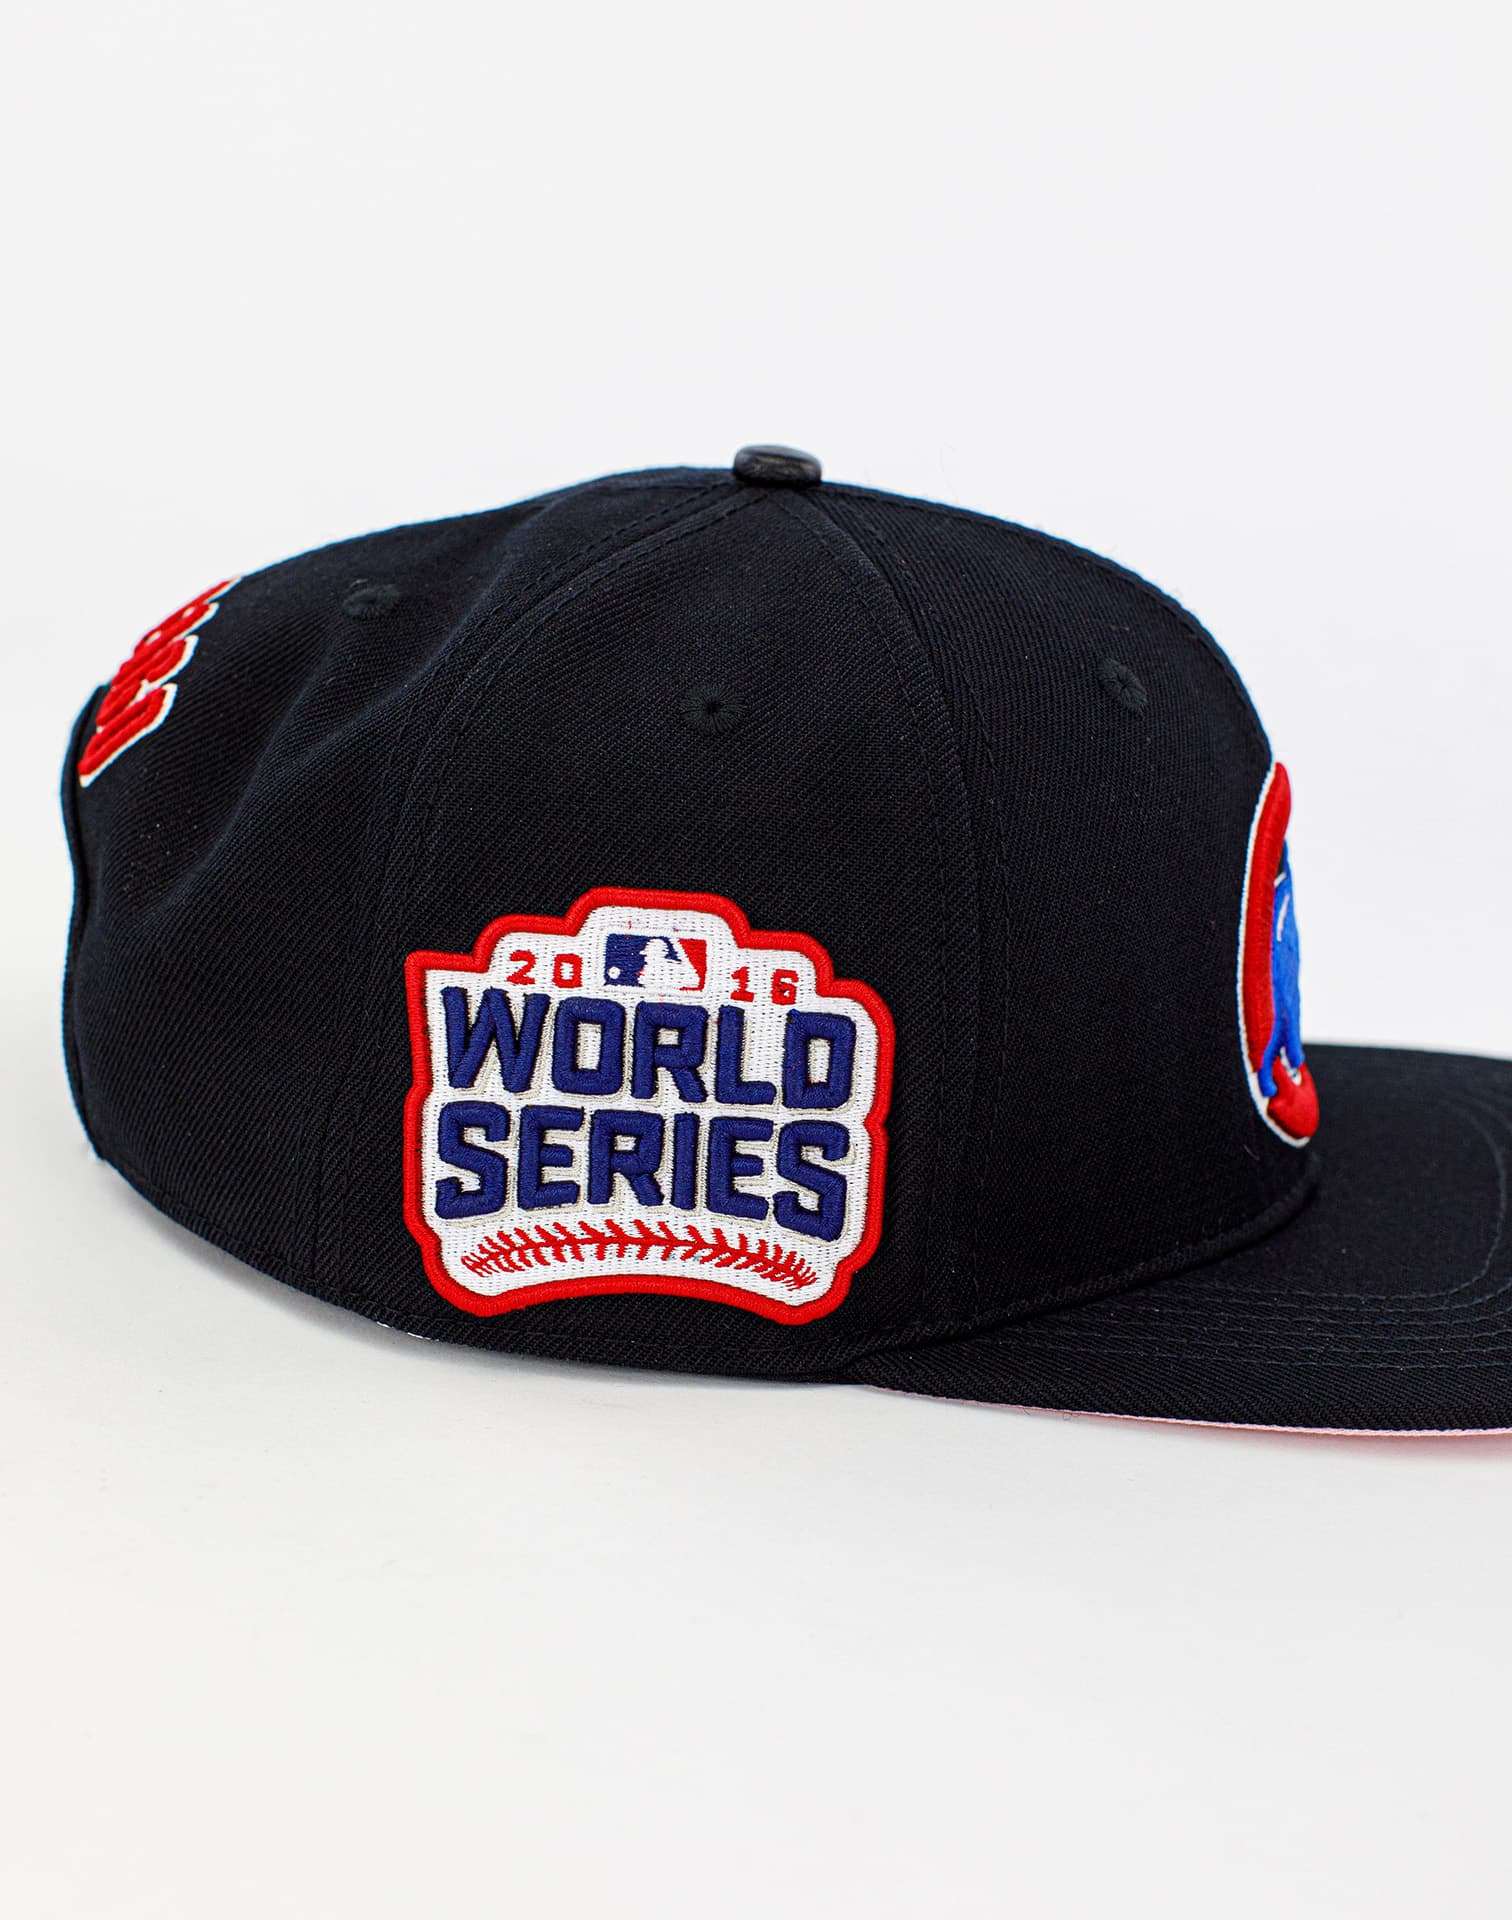 where to purchase a 2016 world series baseball